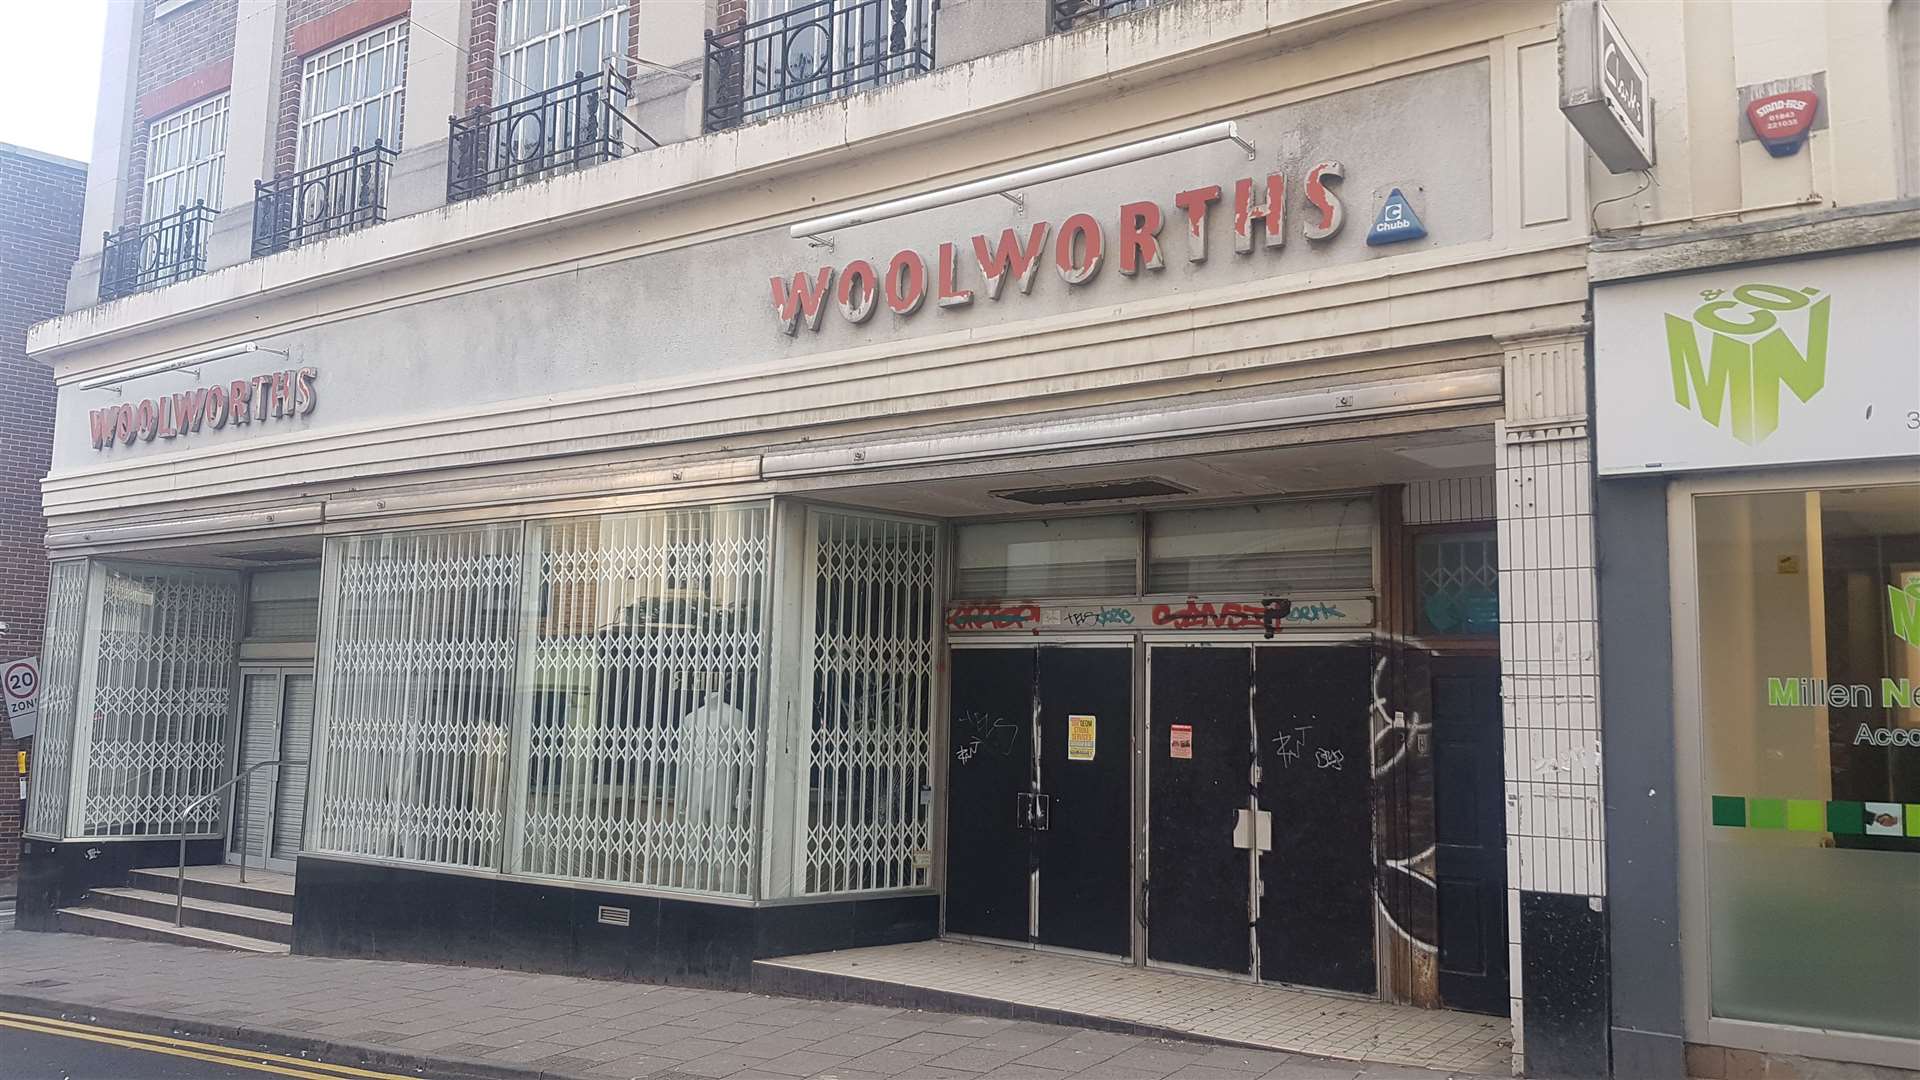 The era of big stores like Woolworths on every high street are at an end